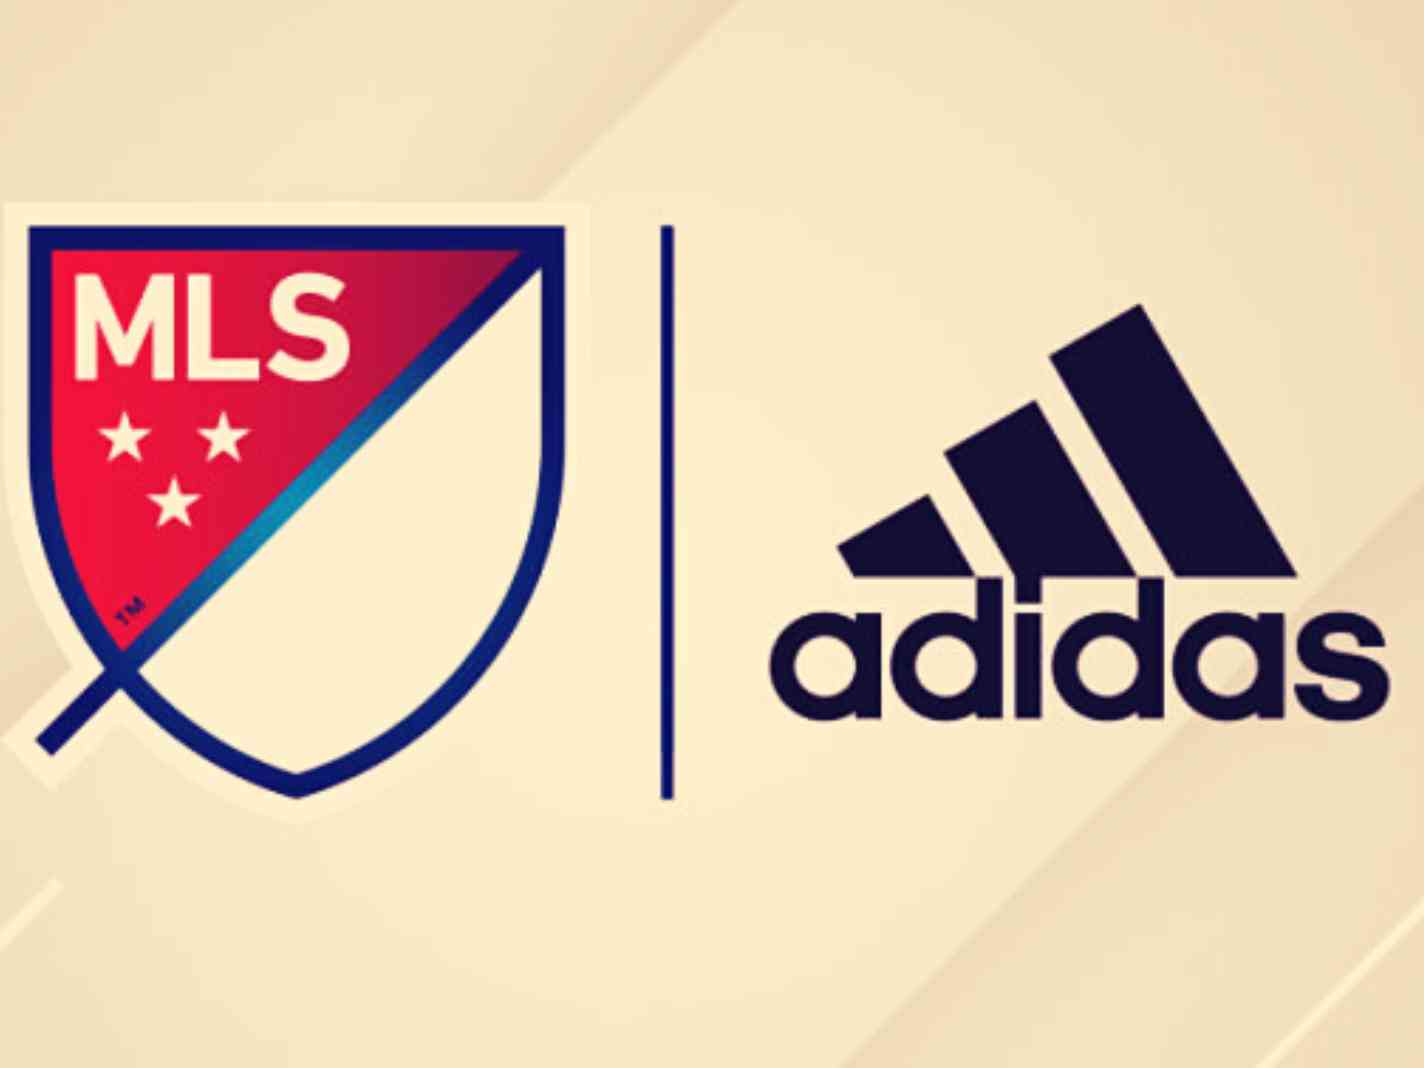 5 kits that helped MLS smash their jersey sales record